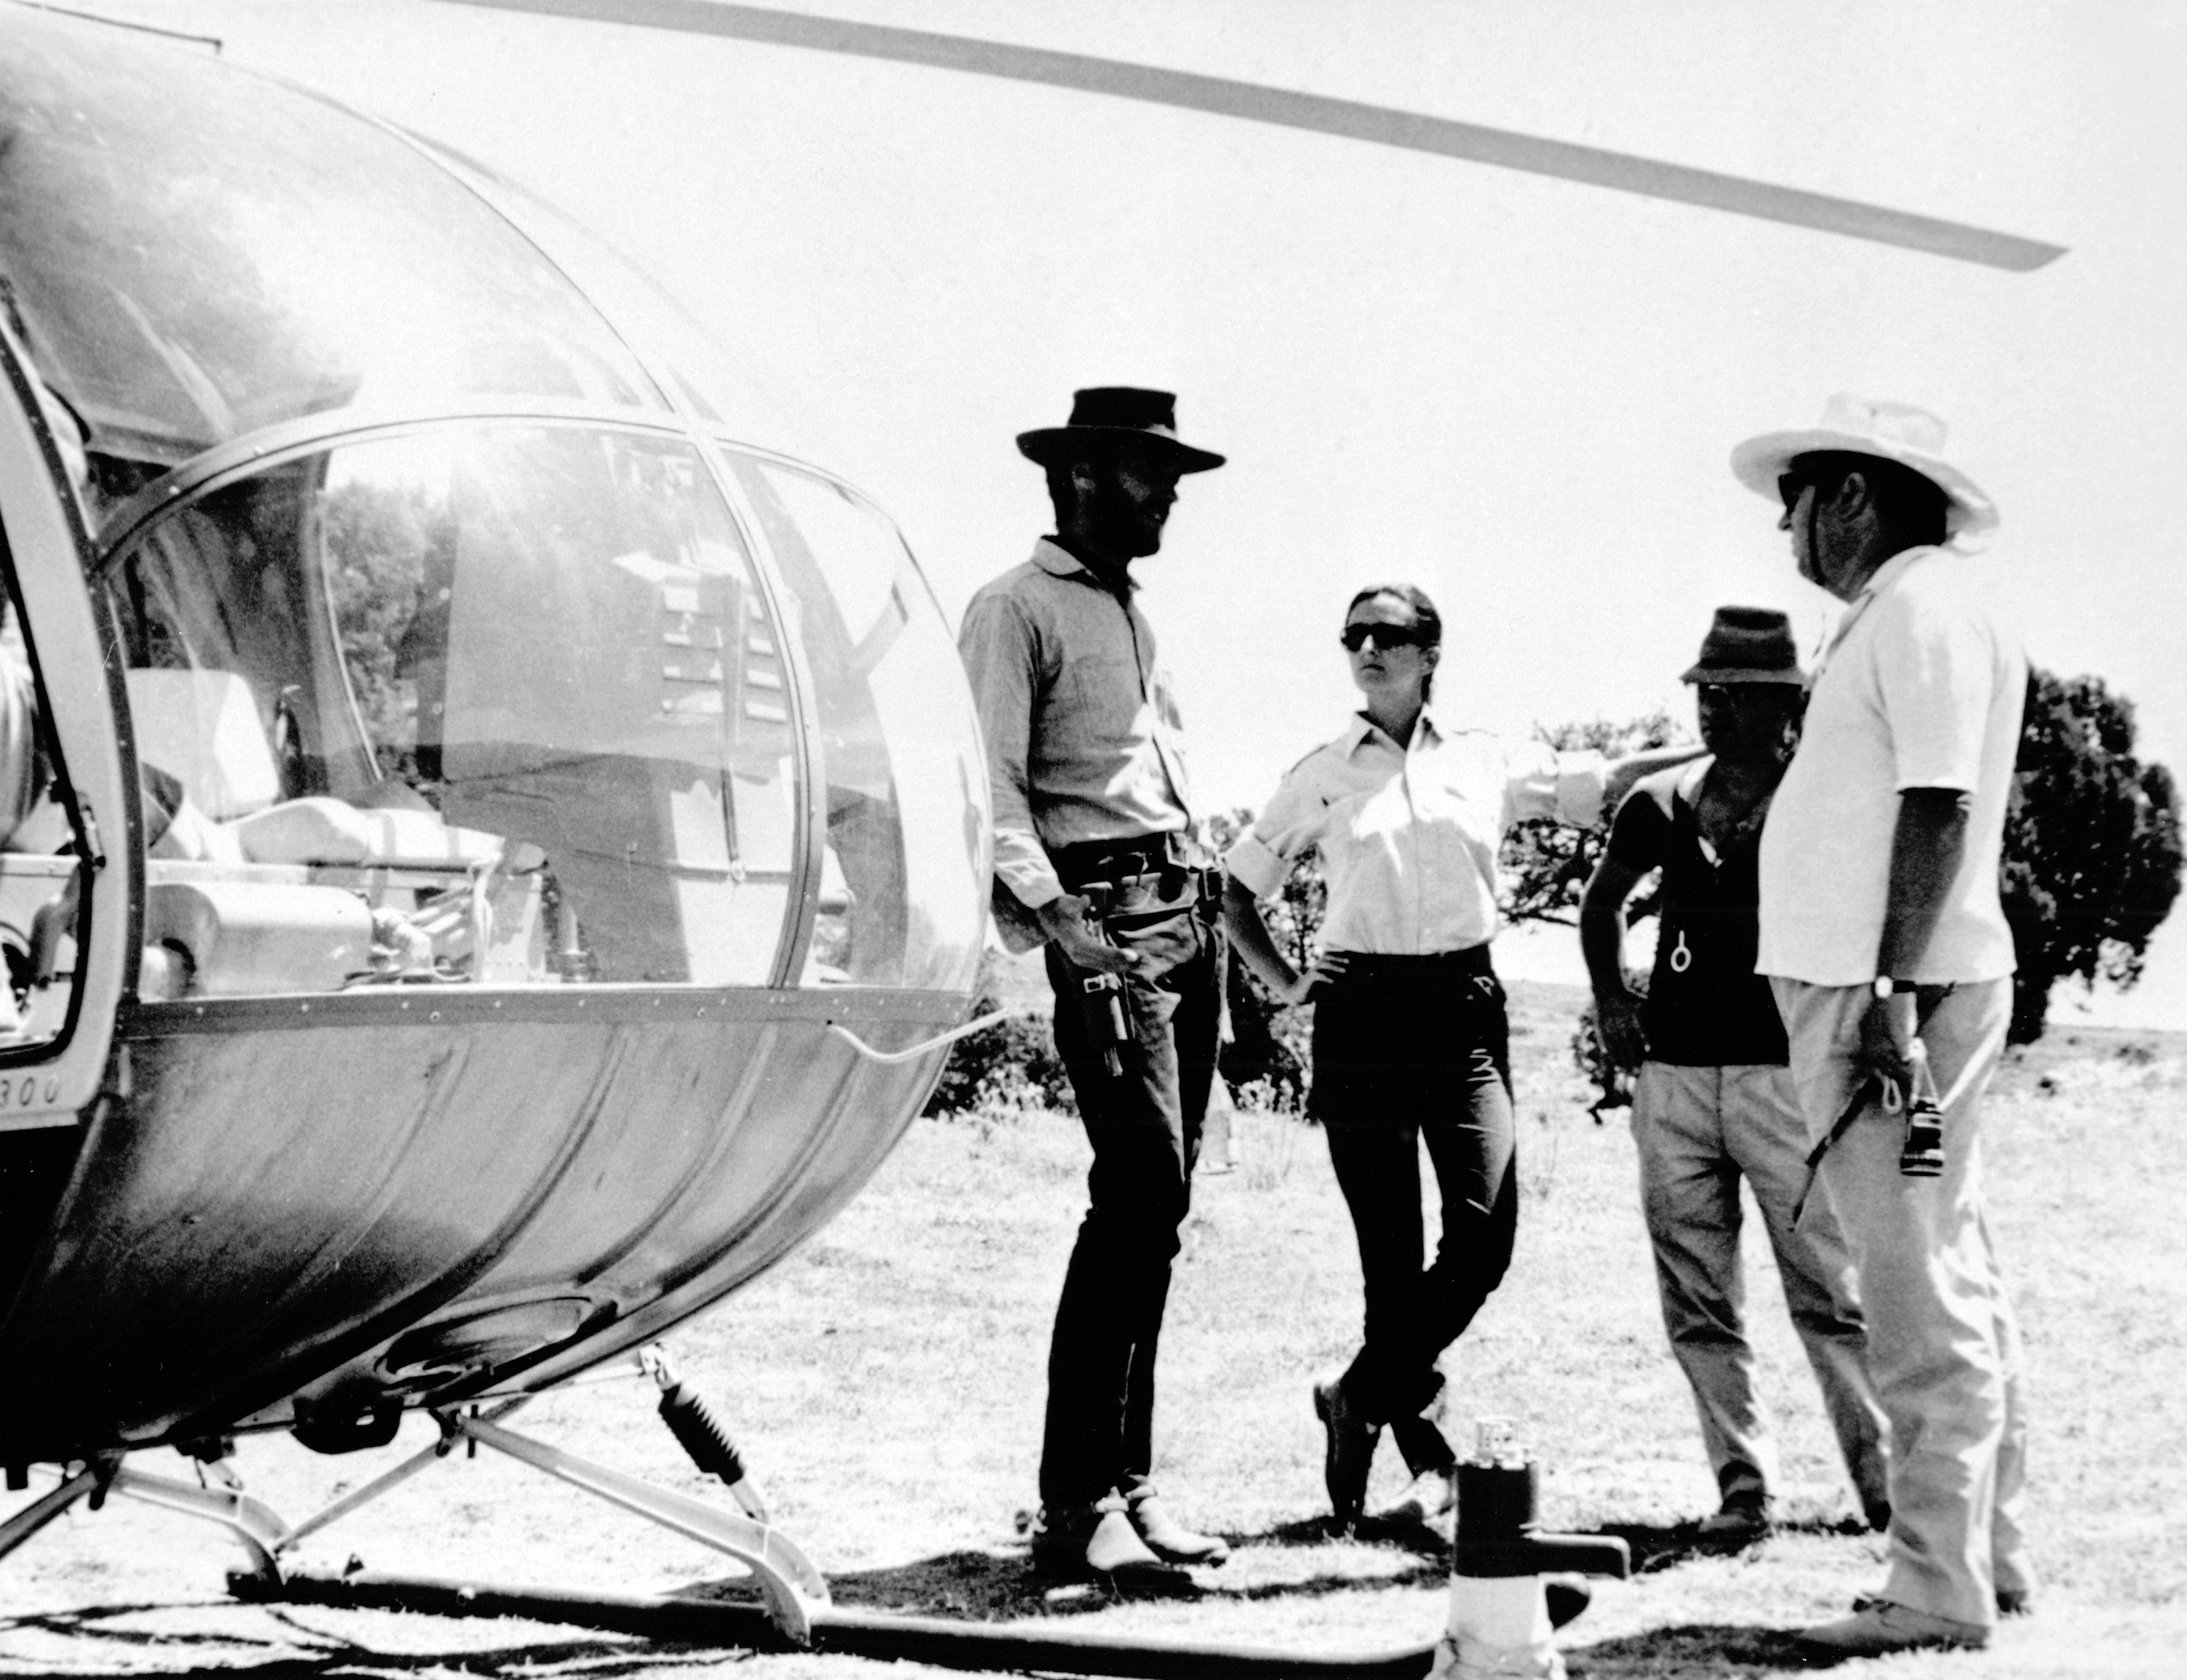 Clint Eastwood, Sergio Leone, Tonino Delli Colli, and Serena Canevari in The Good, the Bad and the Ugly (1966)